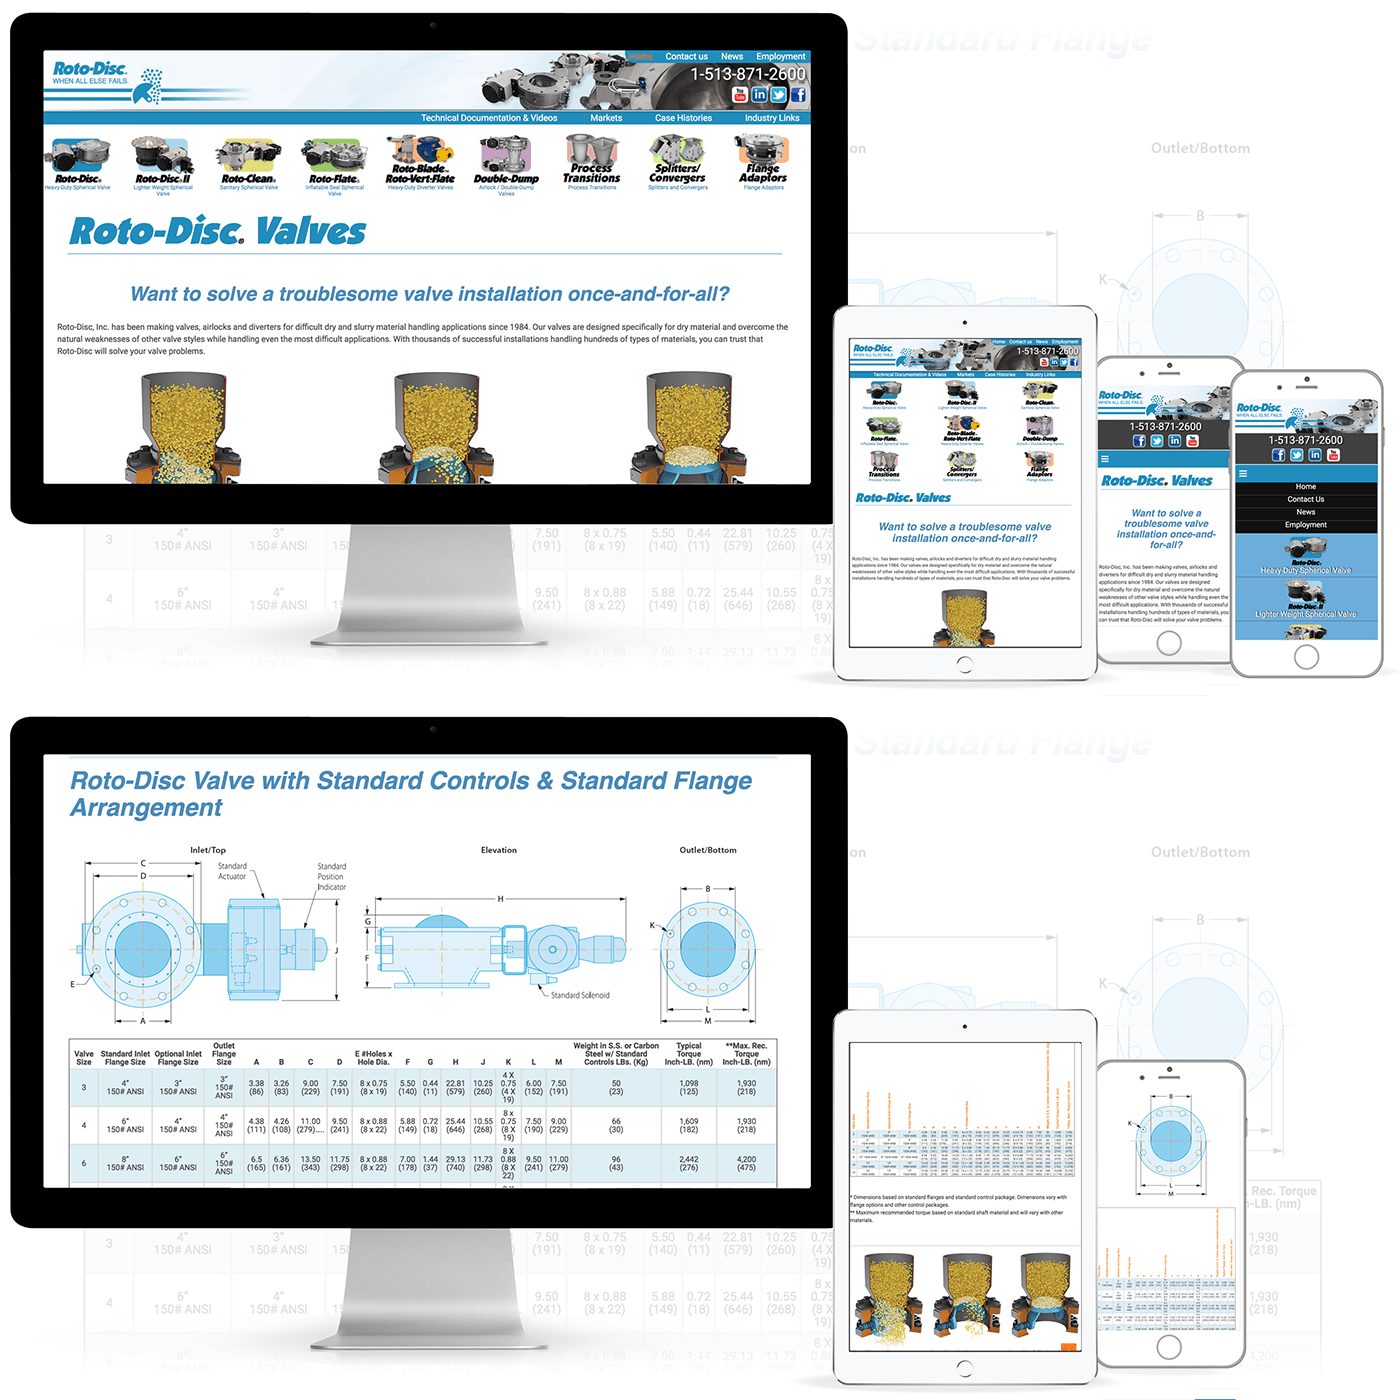 Responsive, mobile Friendly Website Design and Mobile-Friendly Charts for Industrial Valve Company